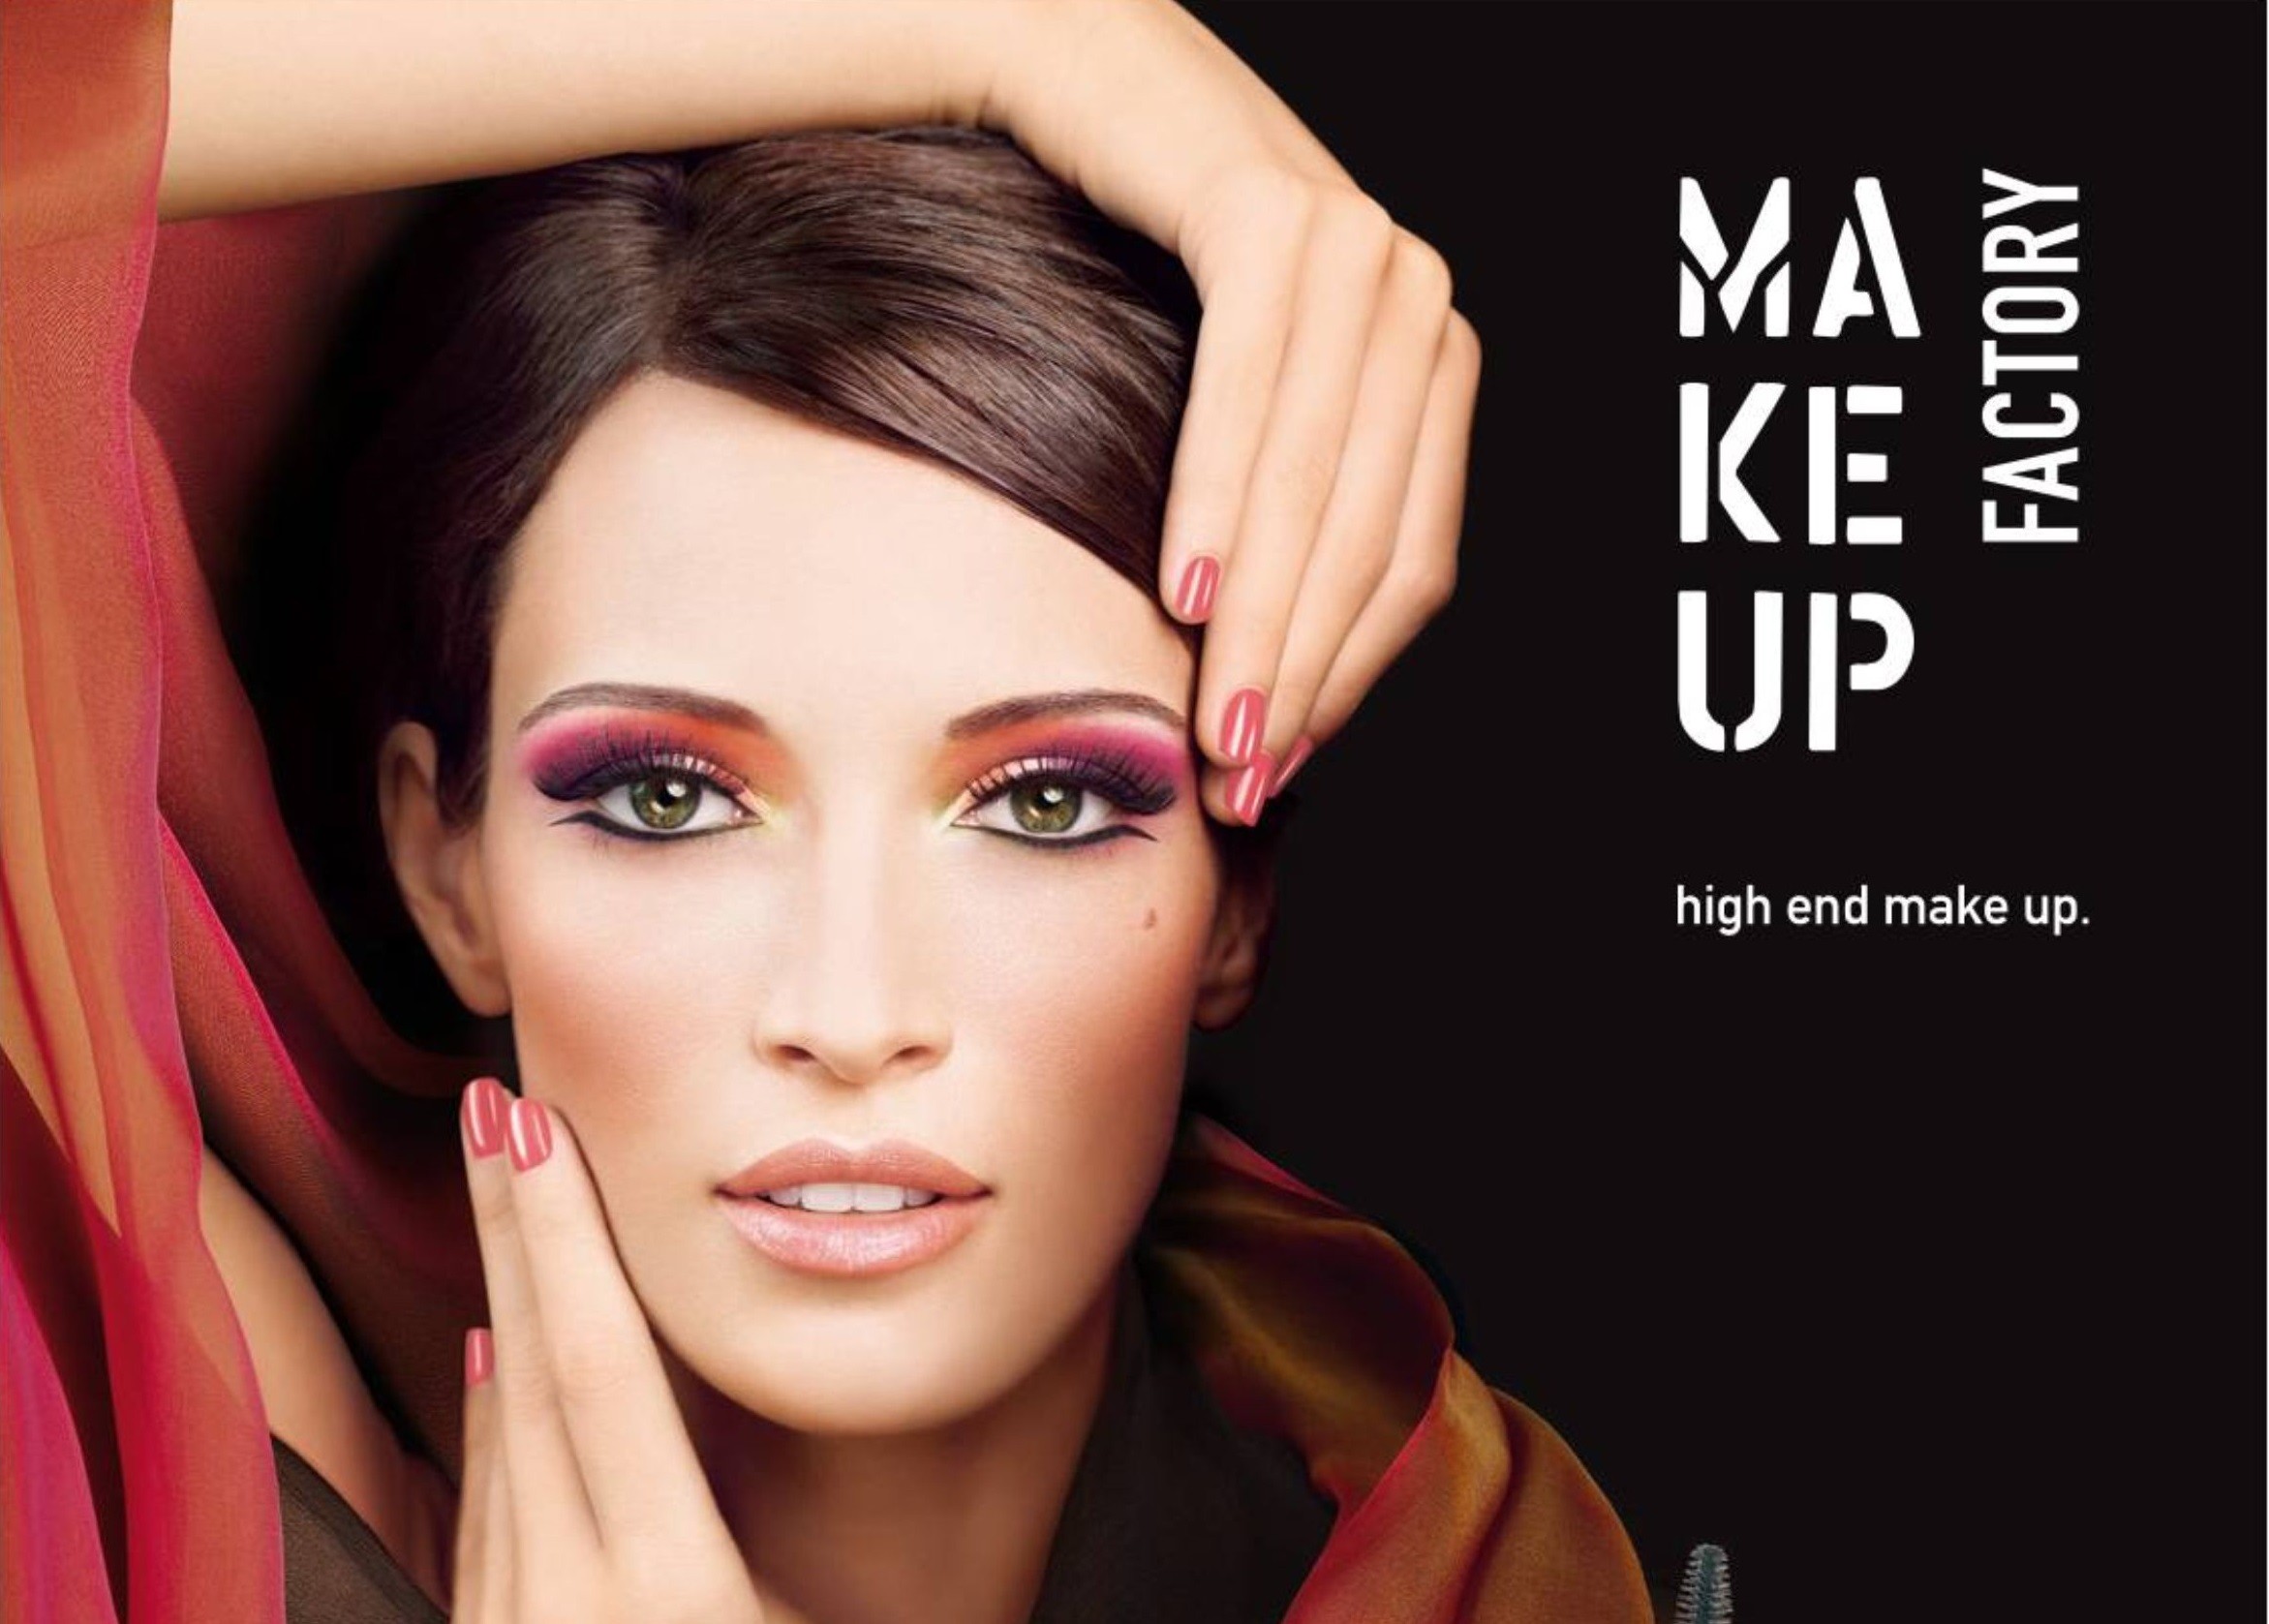 Make up and beauty